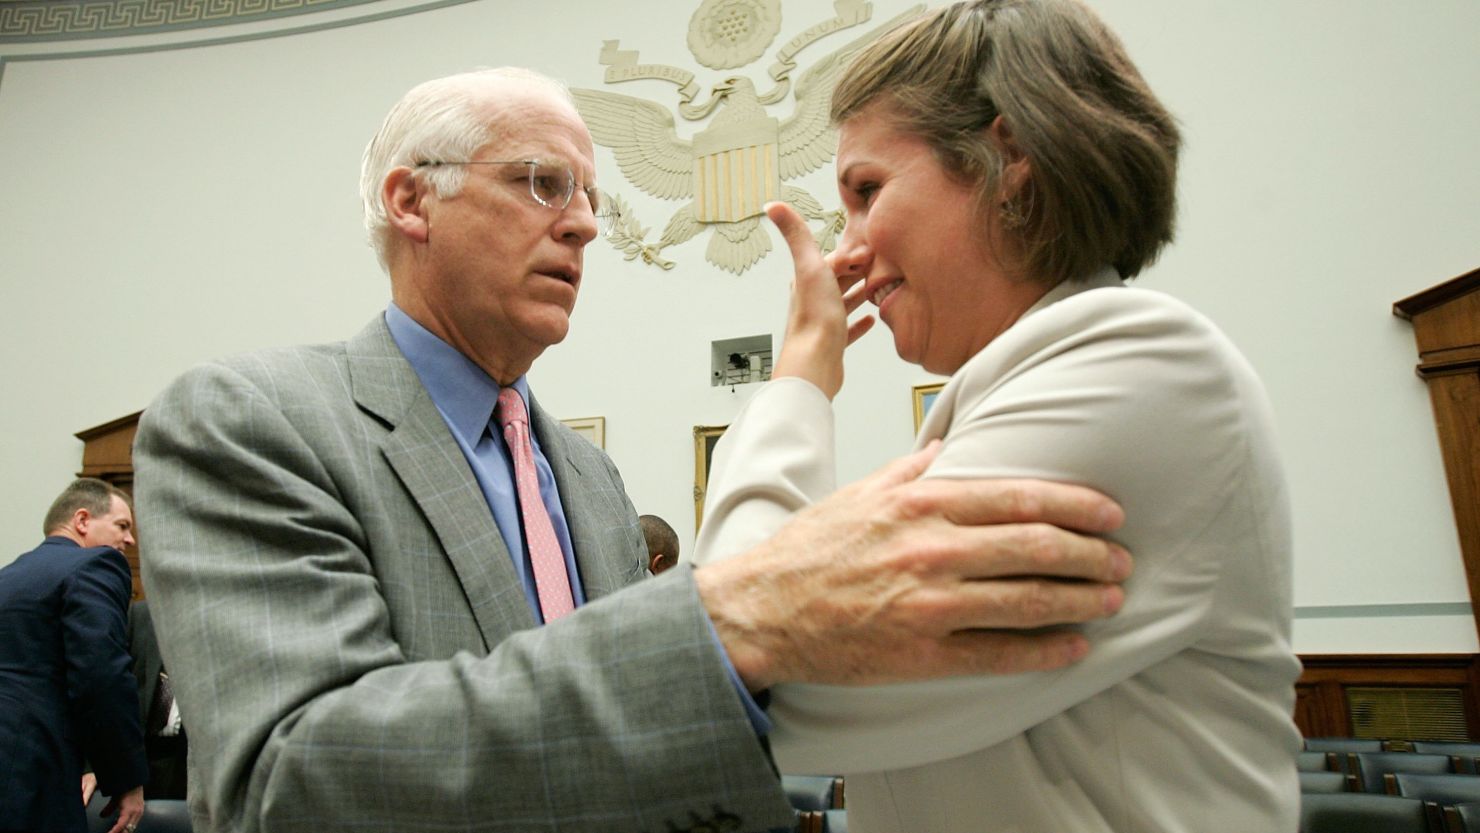 Then-Rep. Christopher Shays comforts ex-air force cadet Beth Davis after her 2006 testimony on sexual assault in the military.